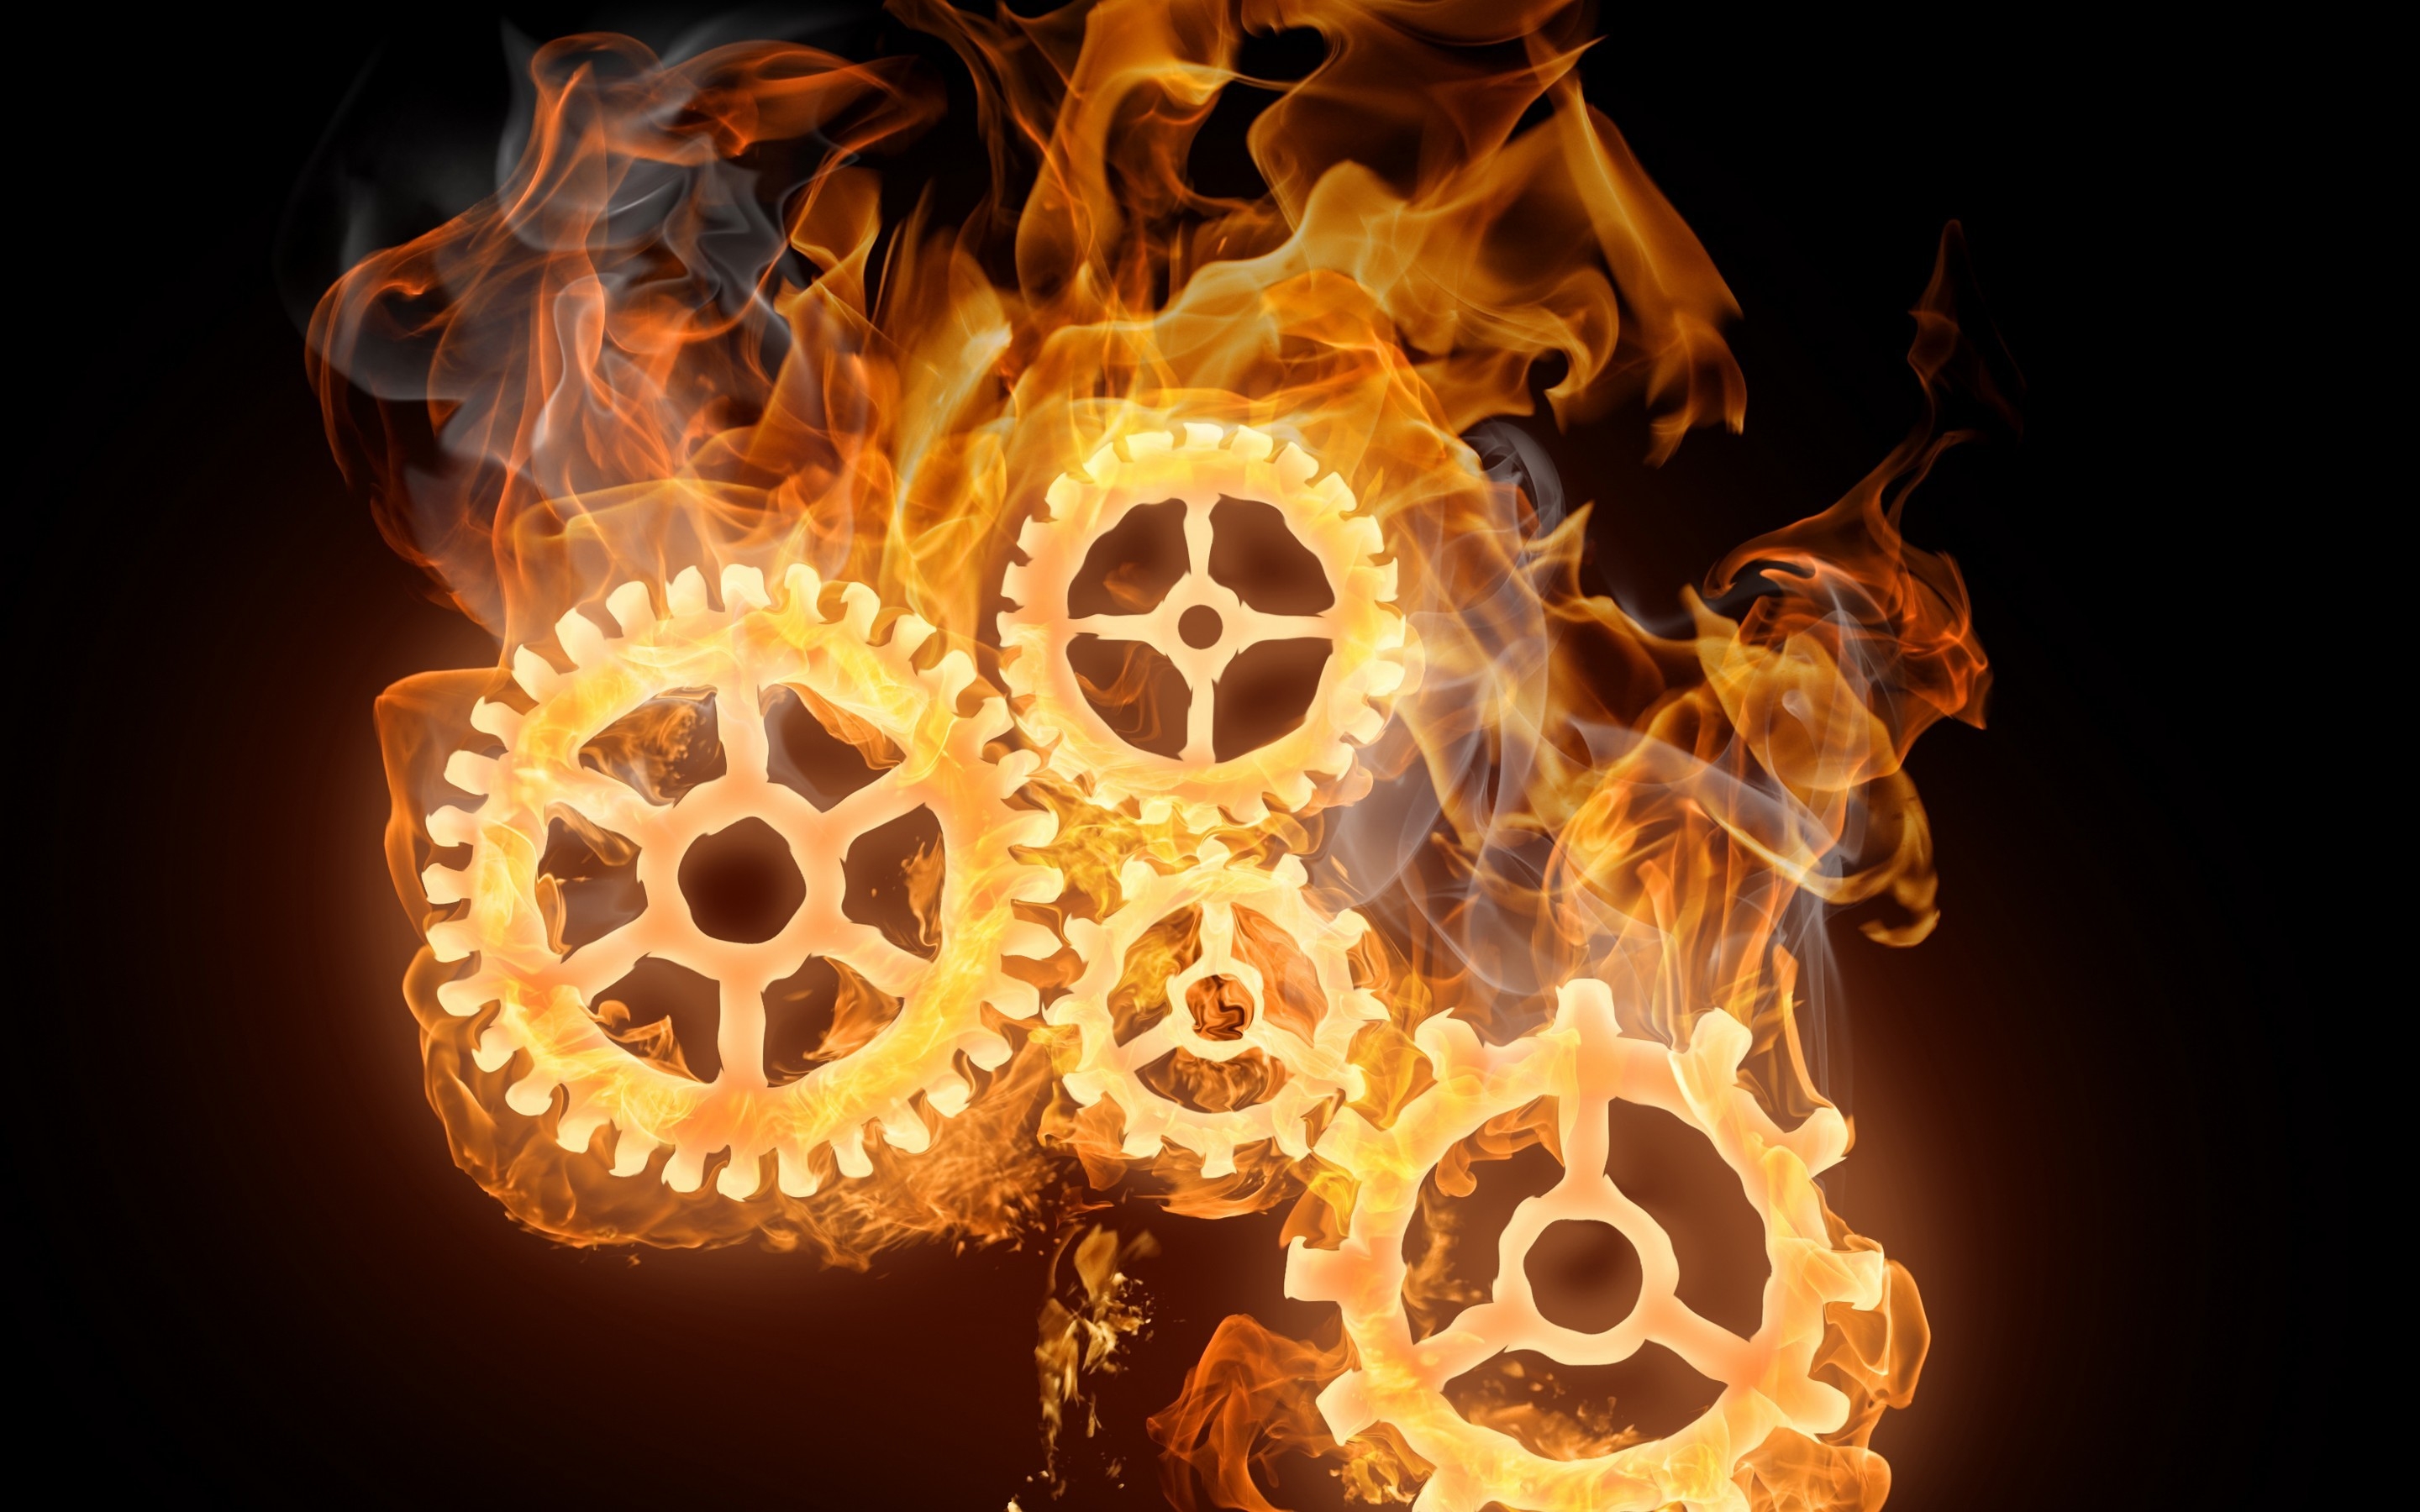 Wheels on Fire for 2880 x 1800 Retina Display resolution